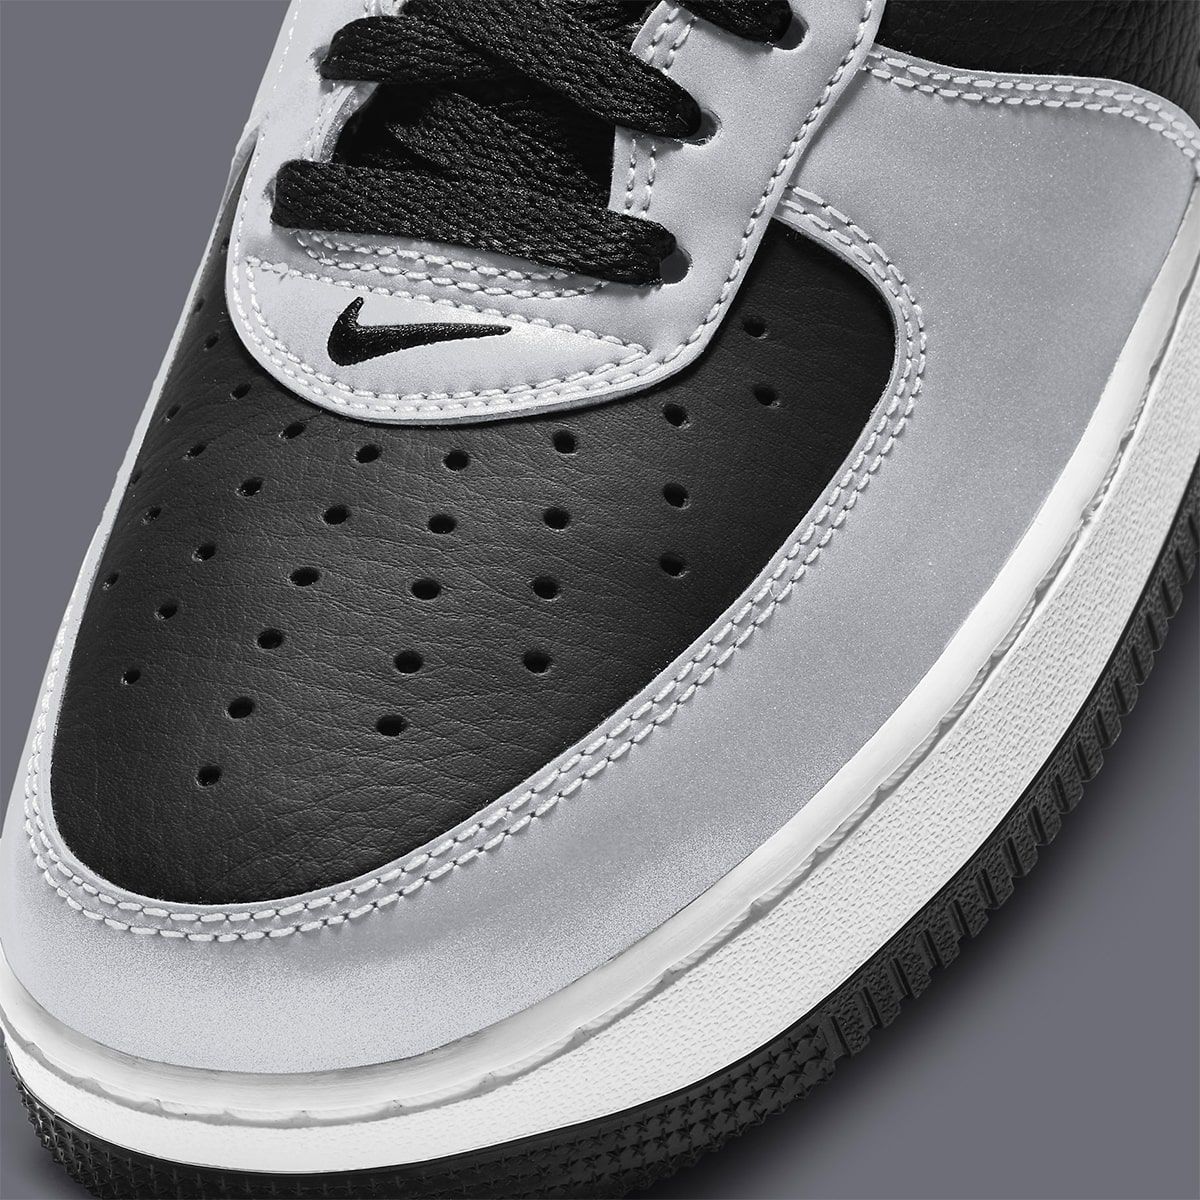 Where to Buy the Nike Air Force 1 B “Reflective Snakeskin” | House 